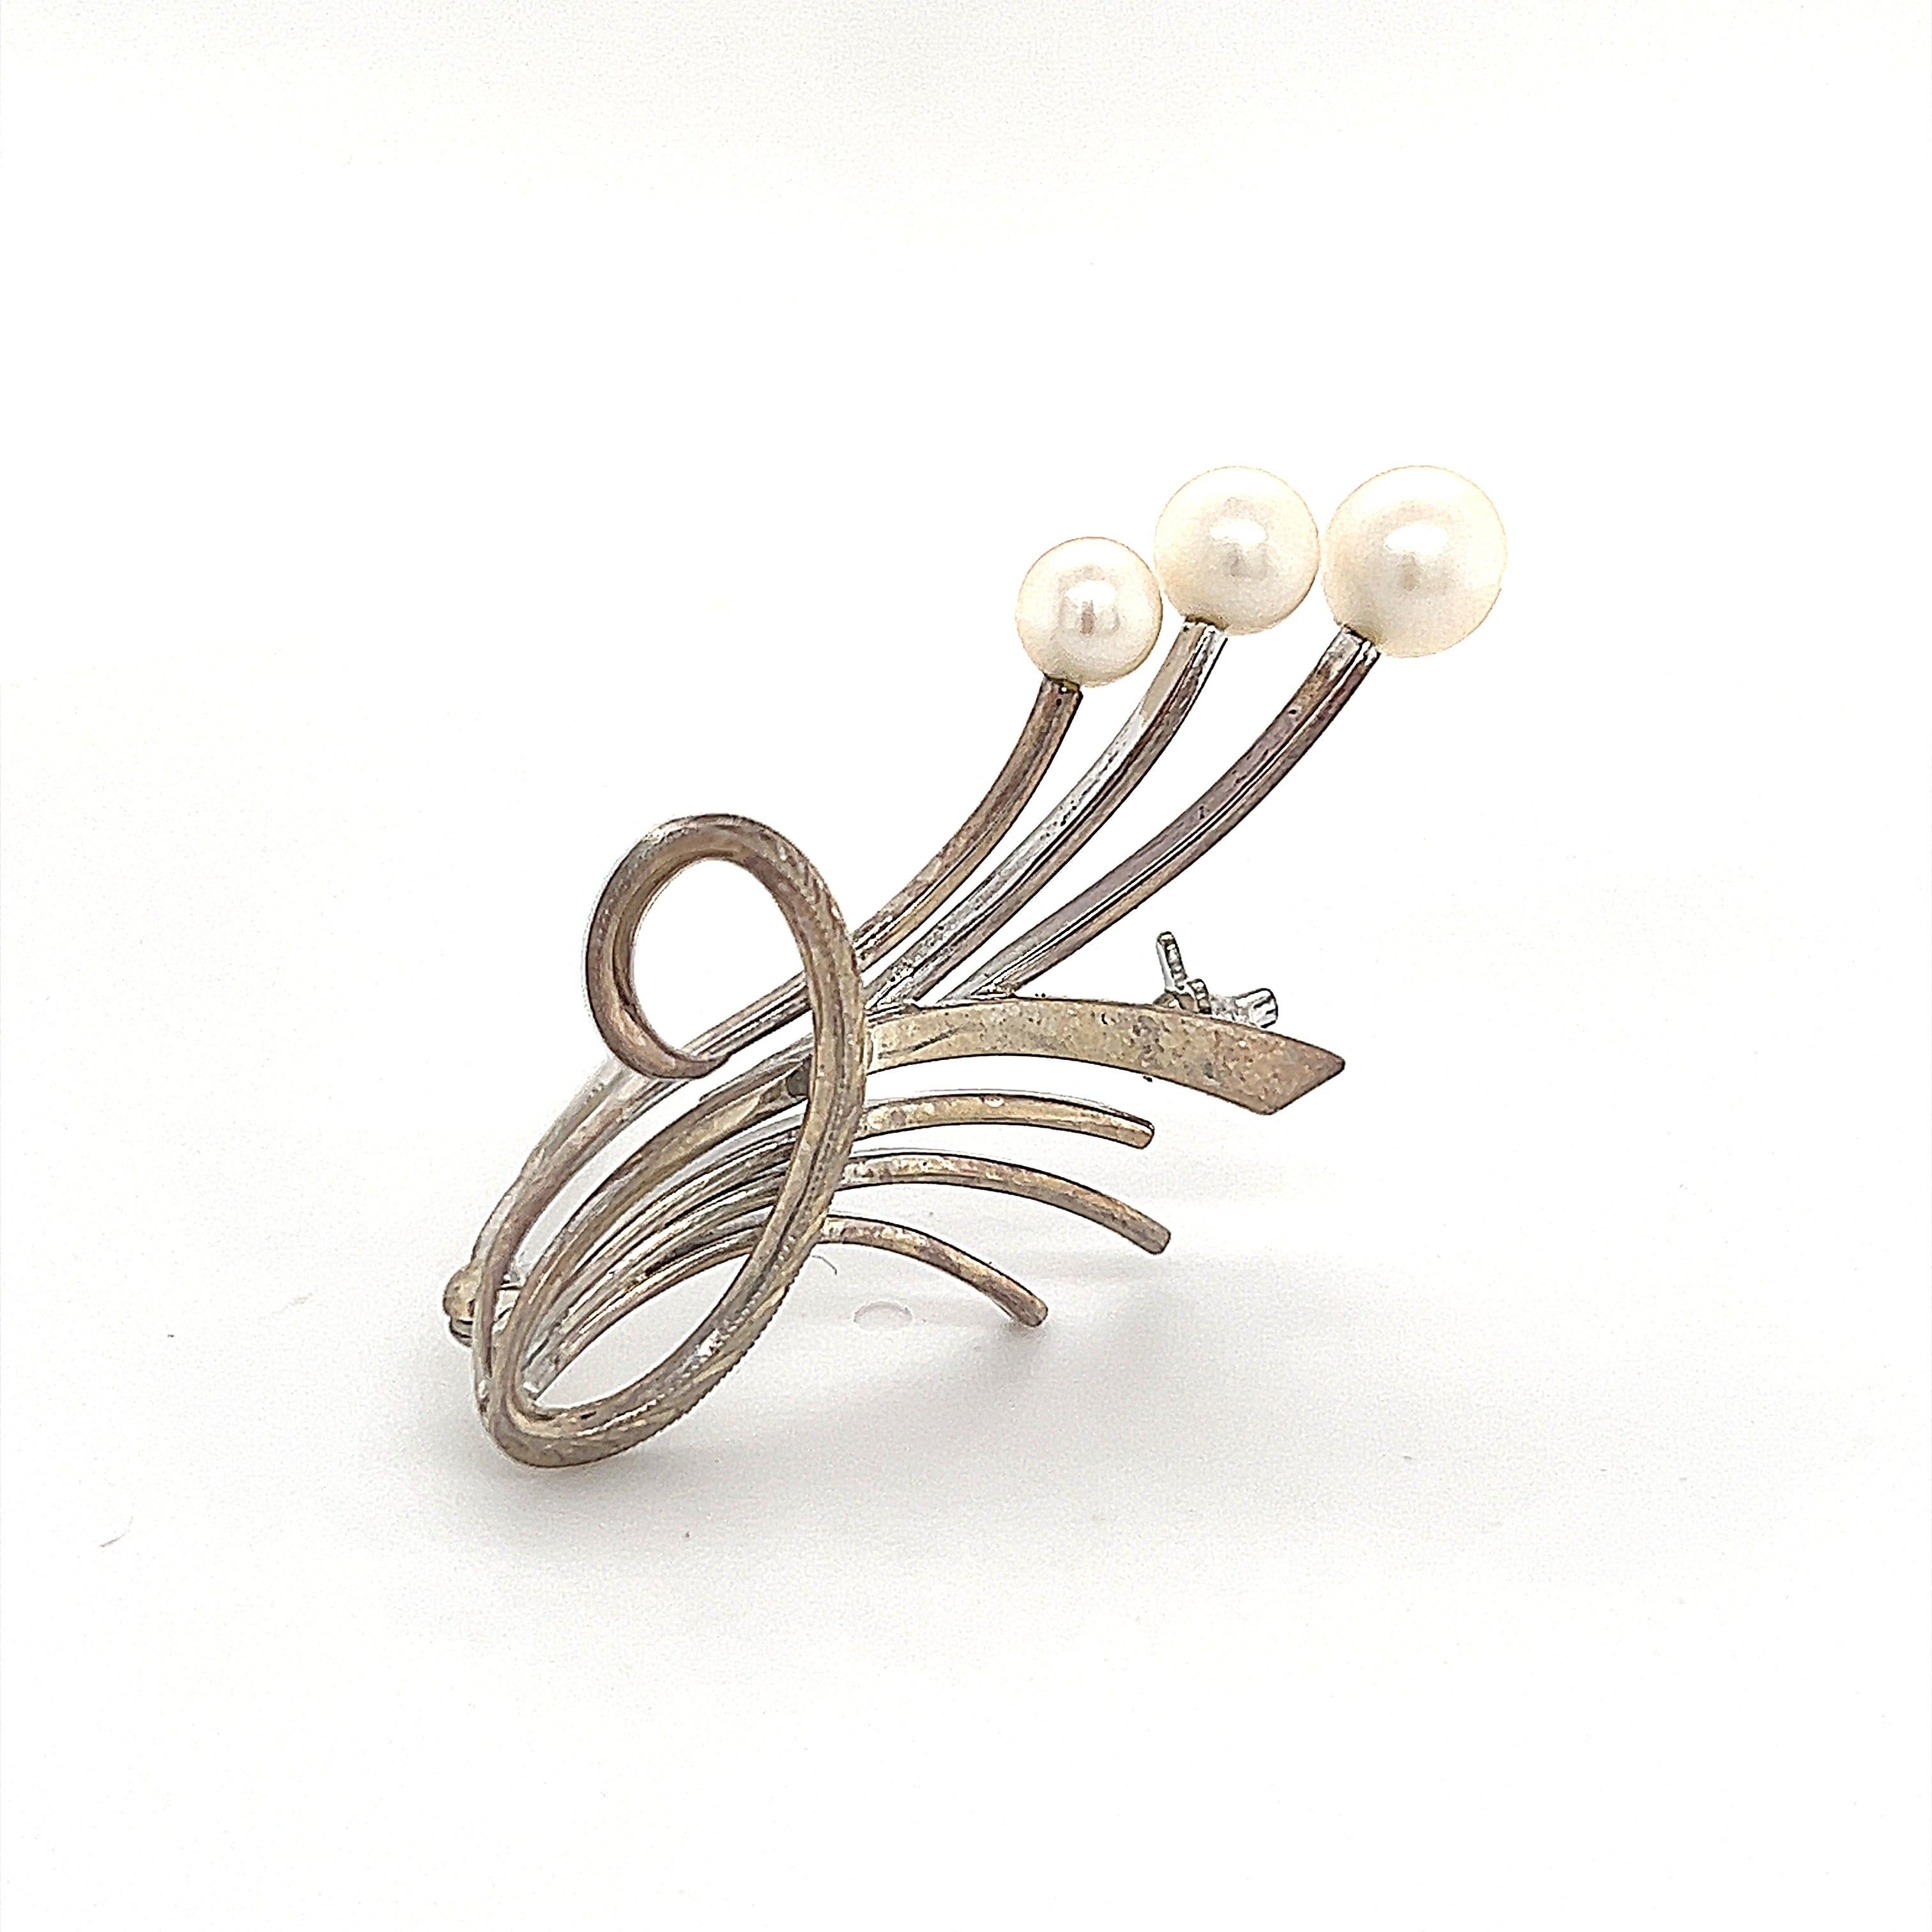 Mikimoto Estate Akoya Pearl Brooch Sterling Silver 6.5 mm 5 Grams In Good Condition For Sale In Brooklyn, NY